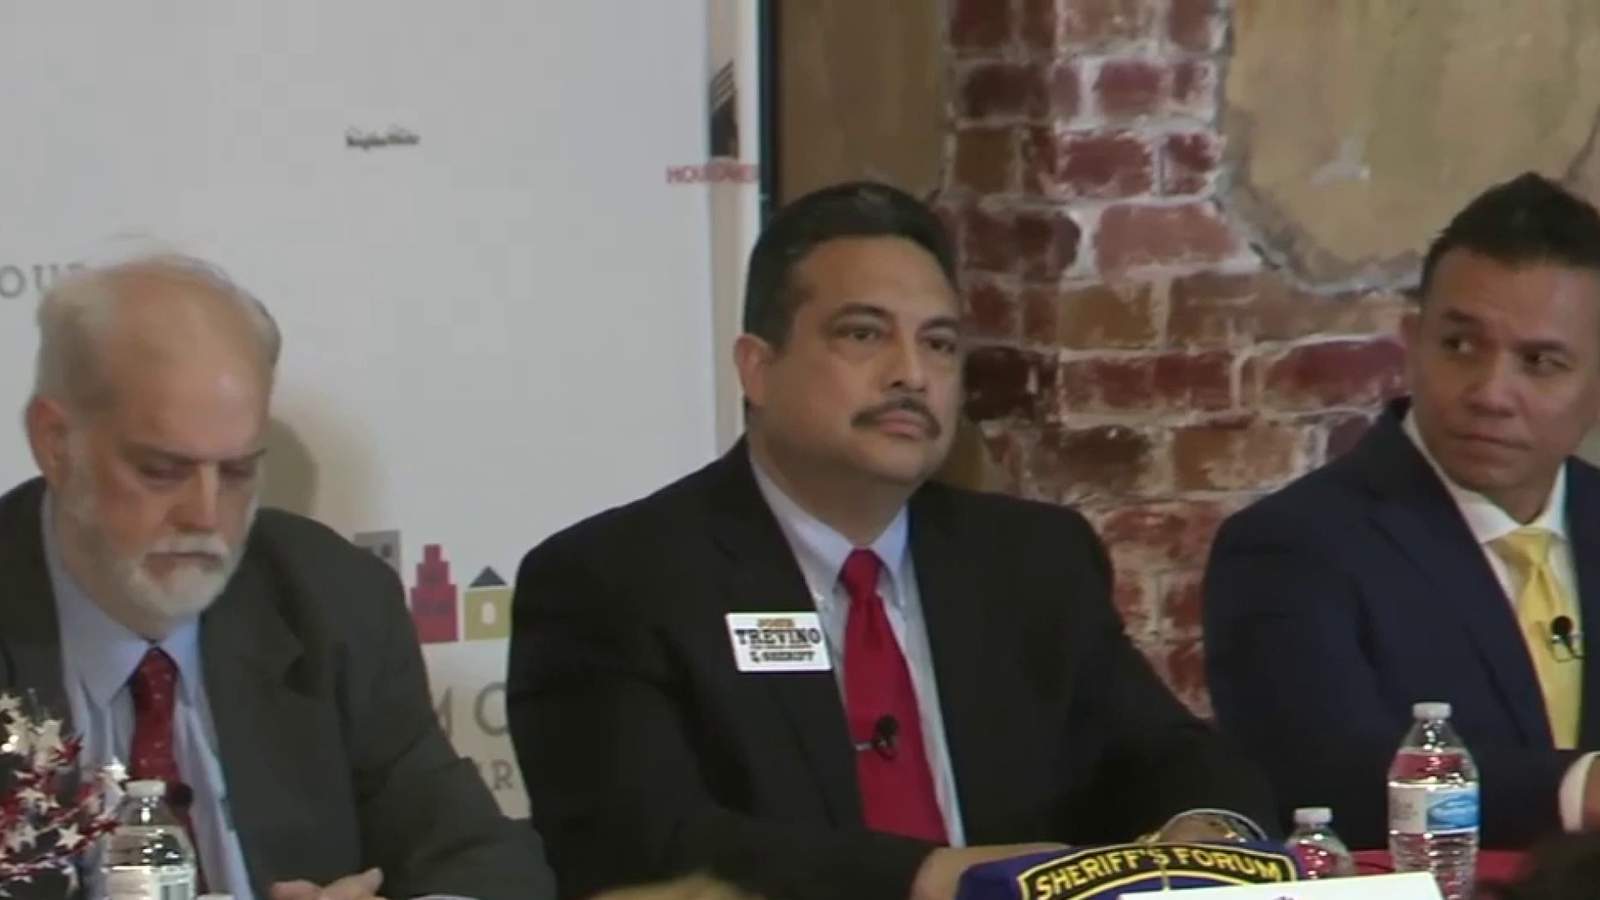 Candidates for Bexar County Sheriff address public’s questions prior to early voting